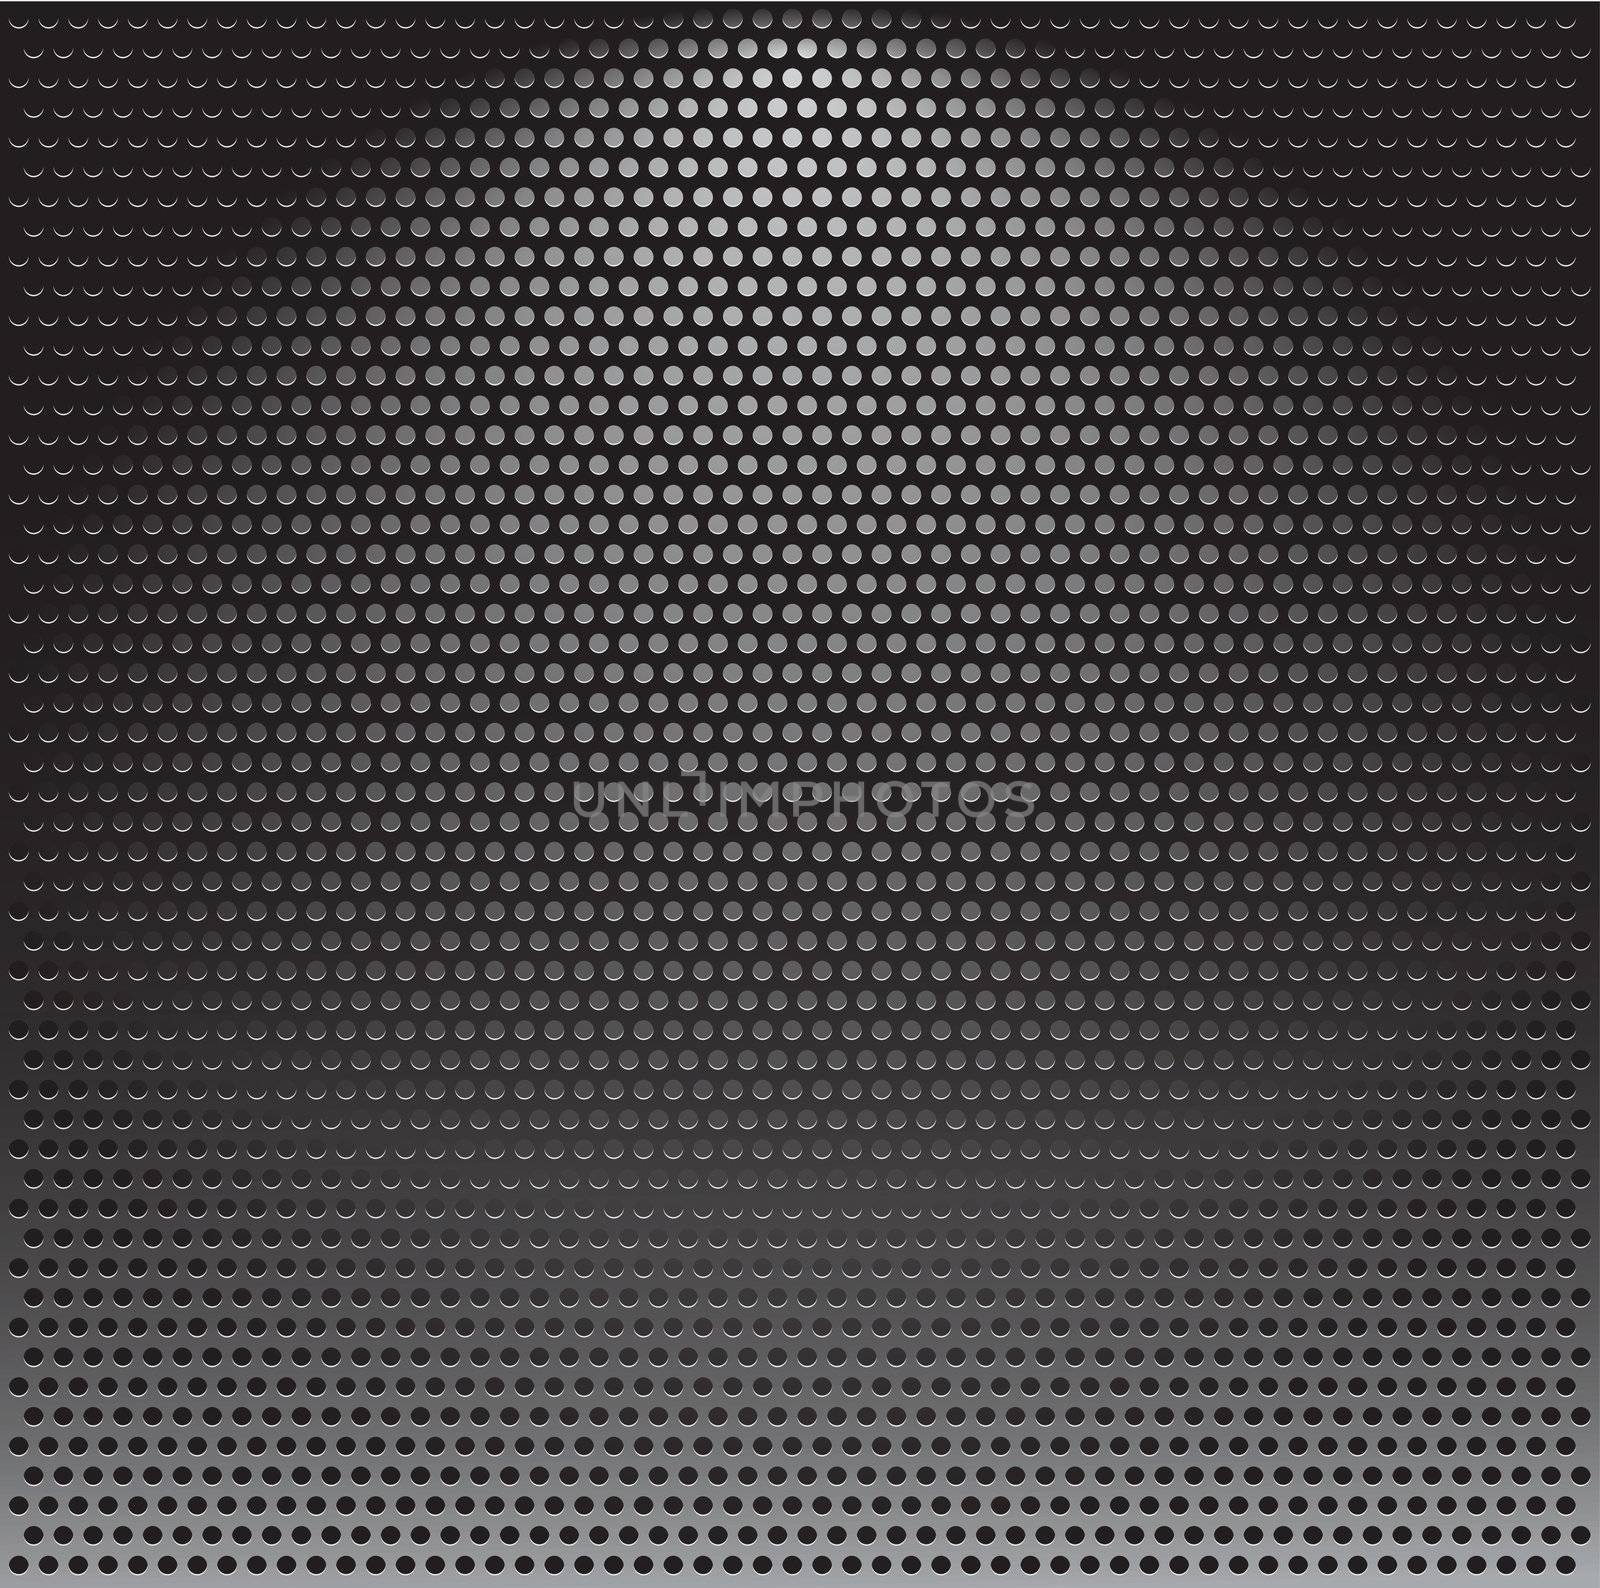 Realistic vector speaker grill background